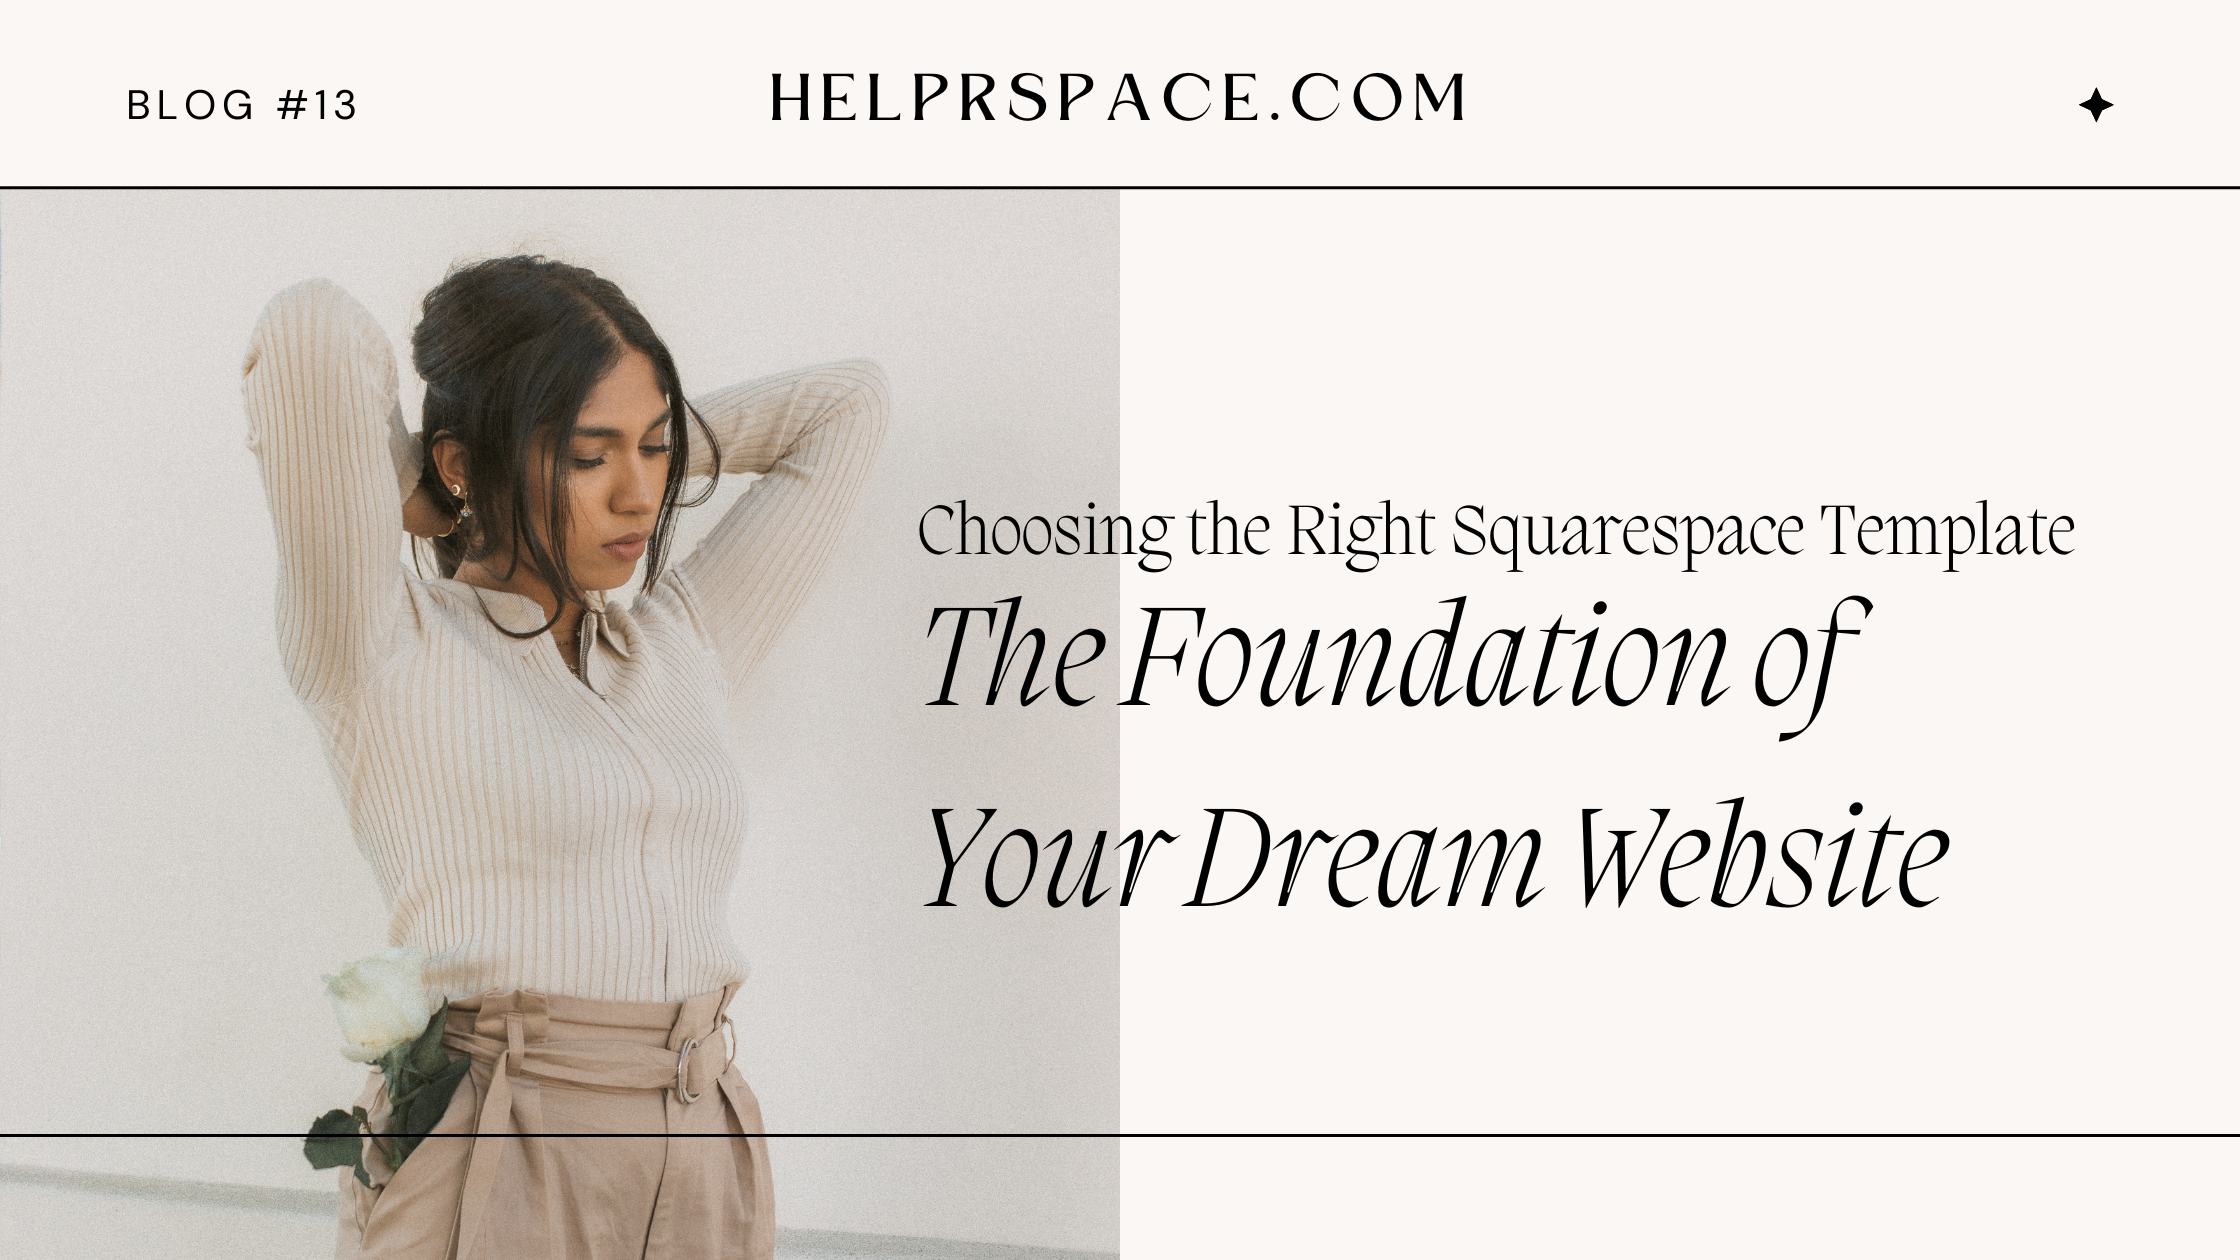 Choosing the Right Squarespace Template: The Foundation of Your Dream Website